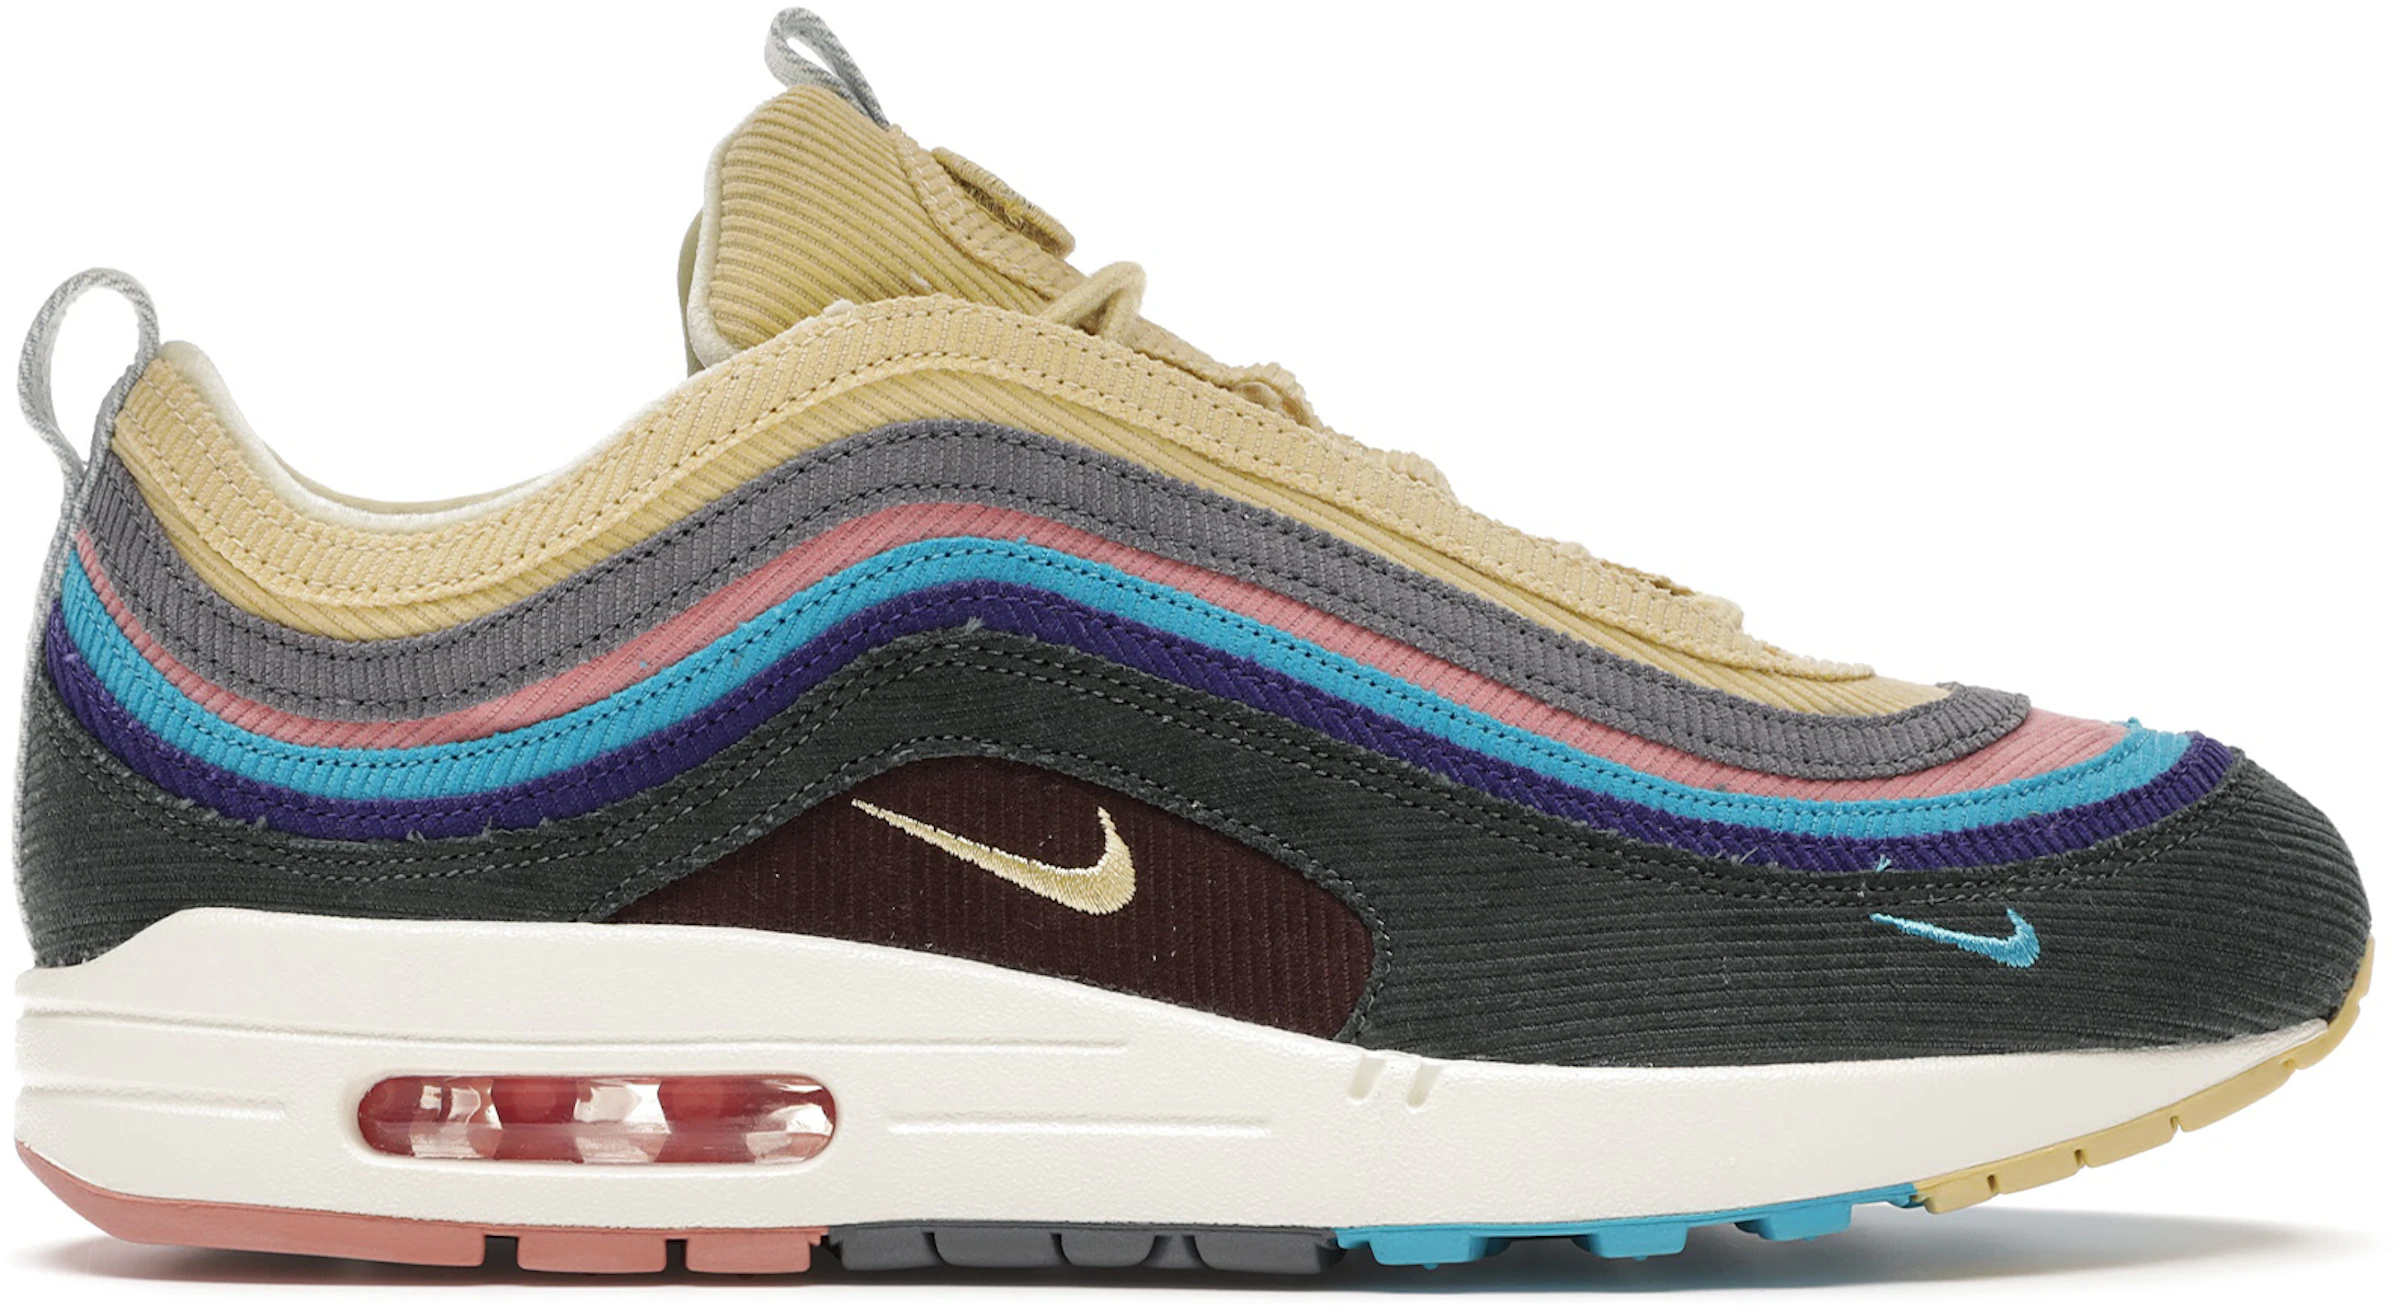 Nike Air Max 1/97 Wotherspoon Accessories Dustbag) - AJ4219-400 - US